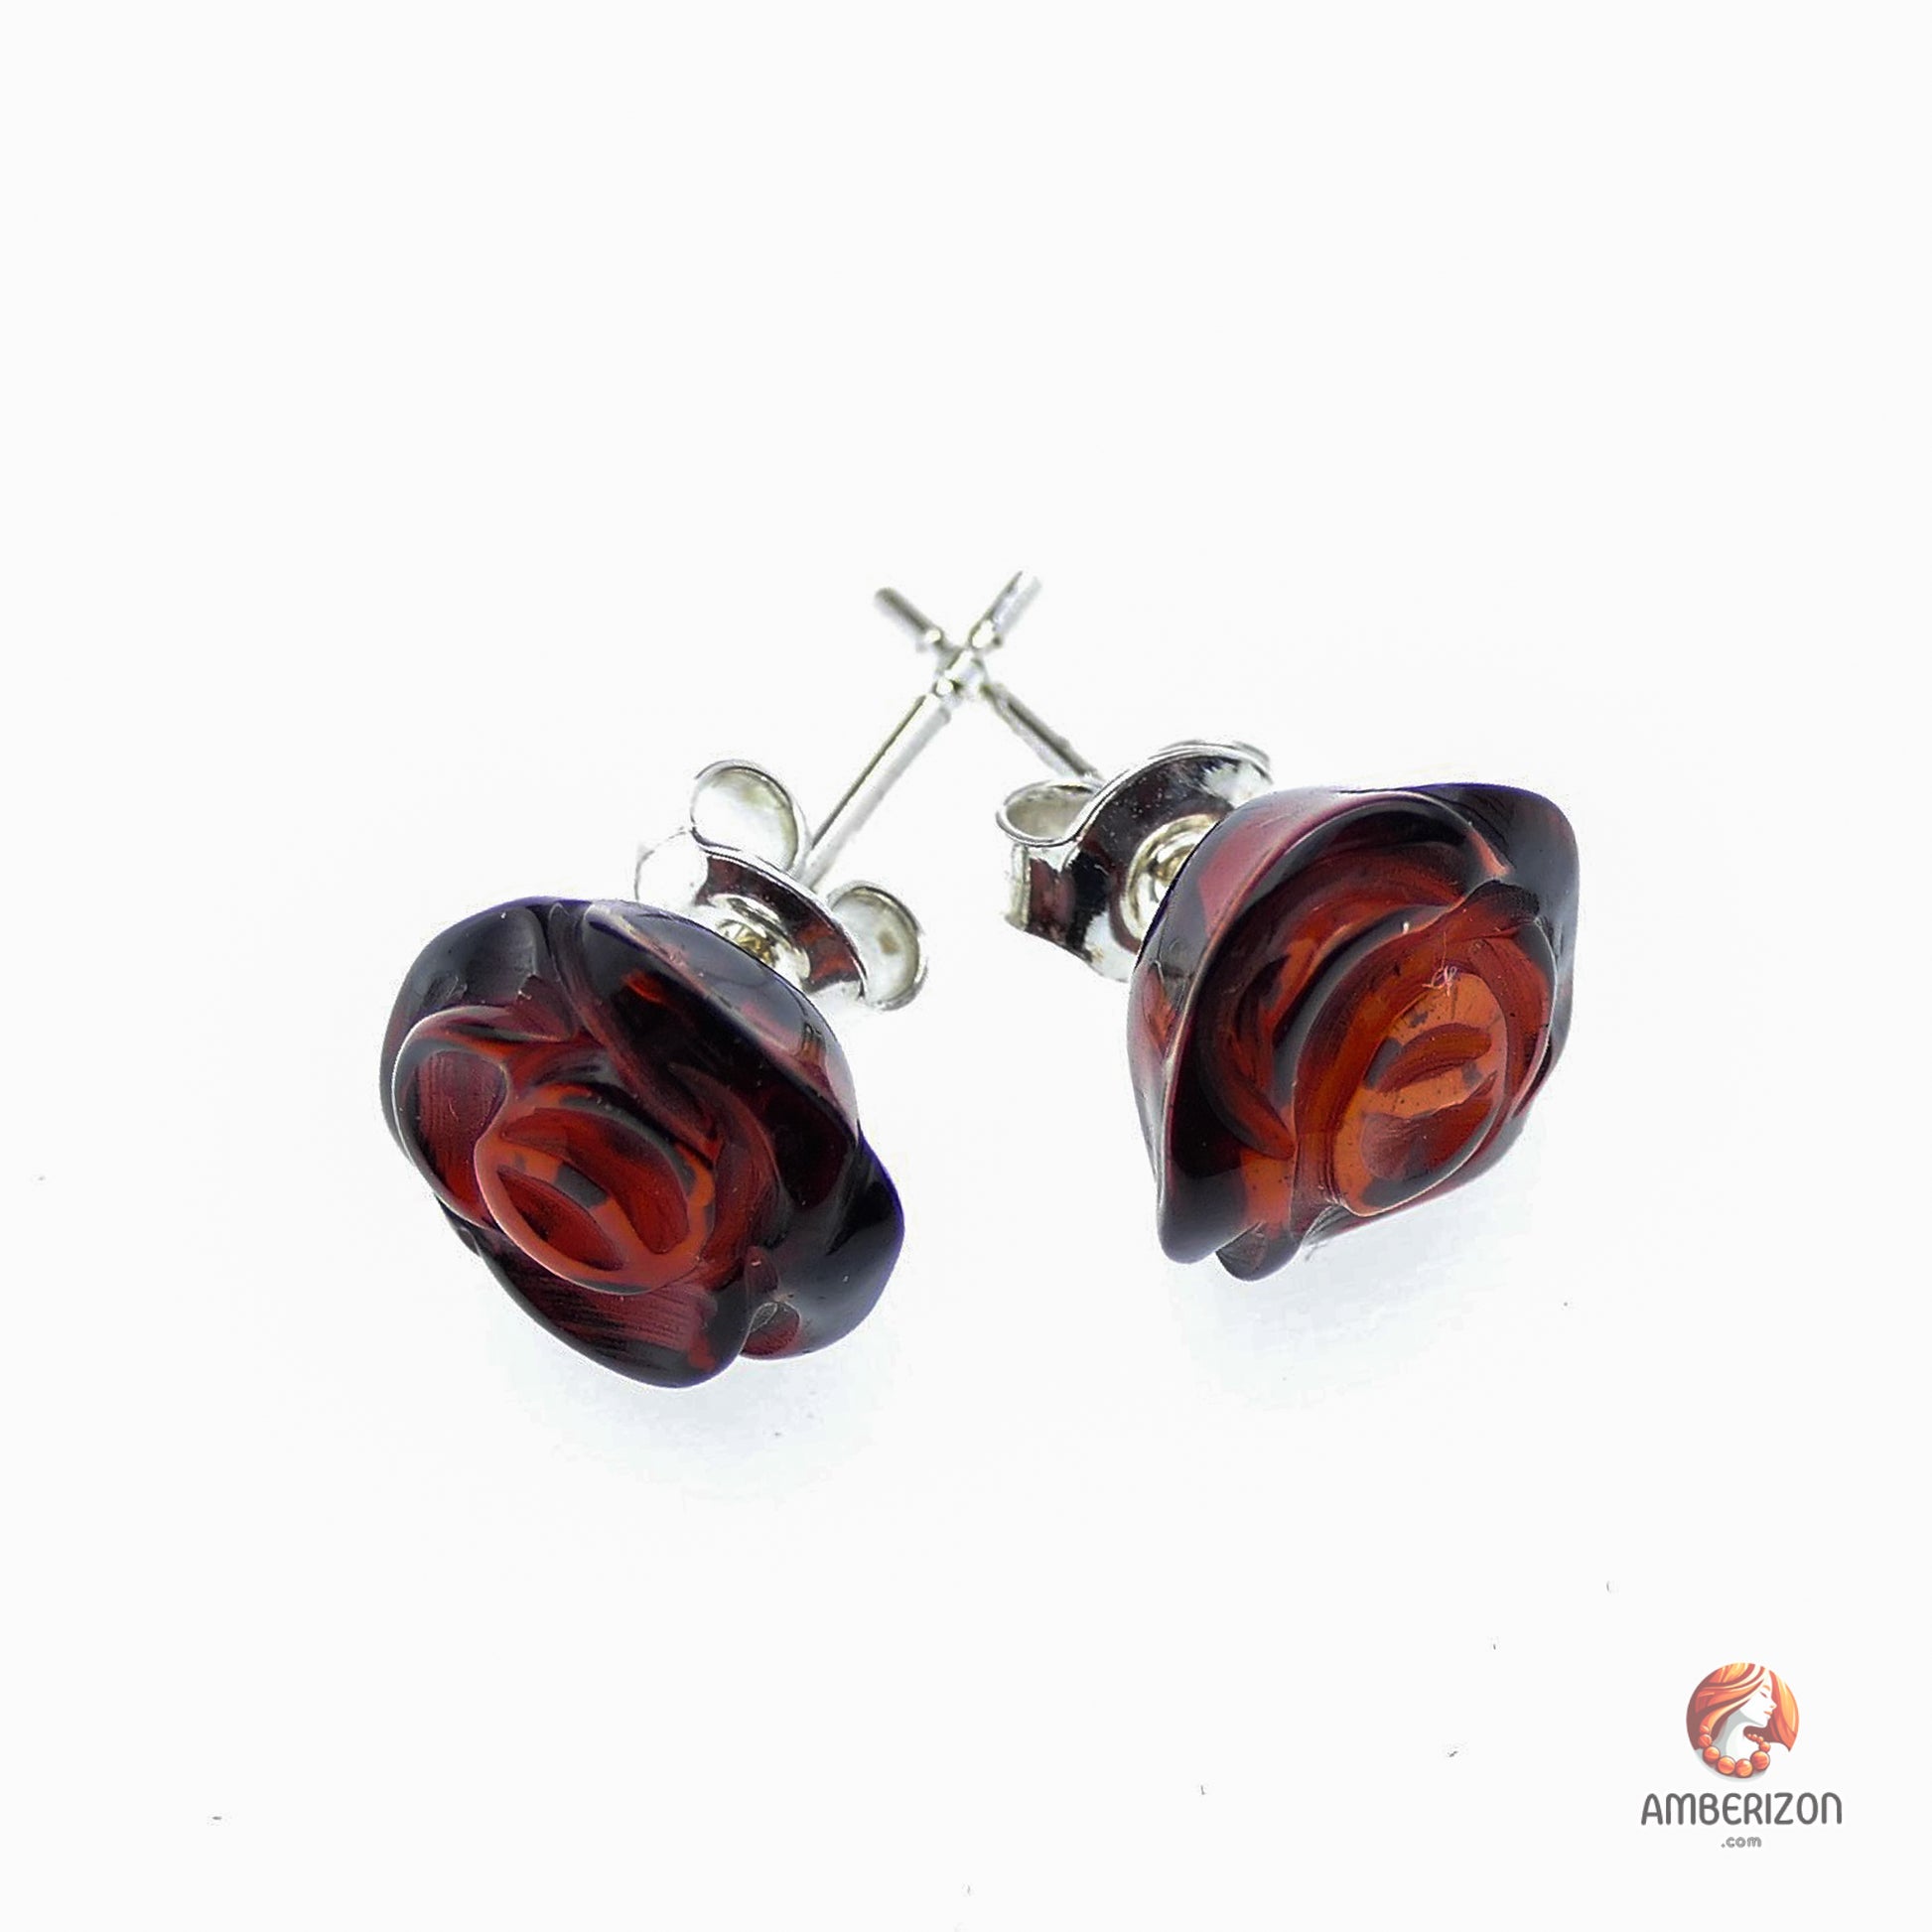 Carved Baltic amber rose earrings - Cherry gemstone studs